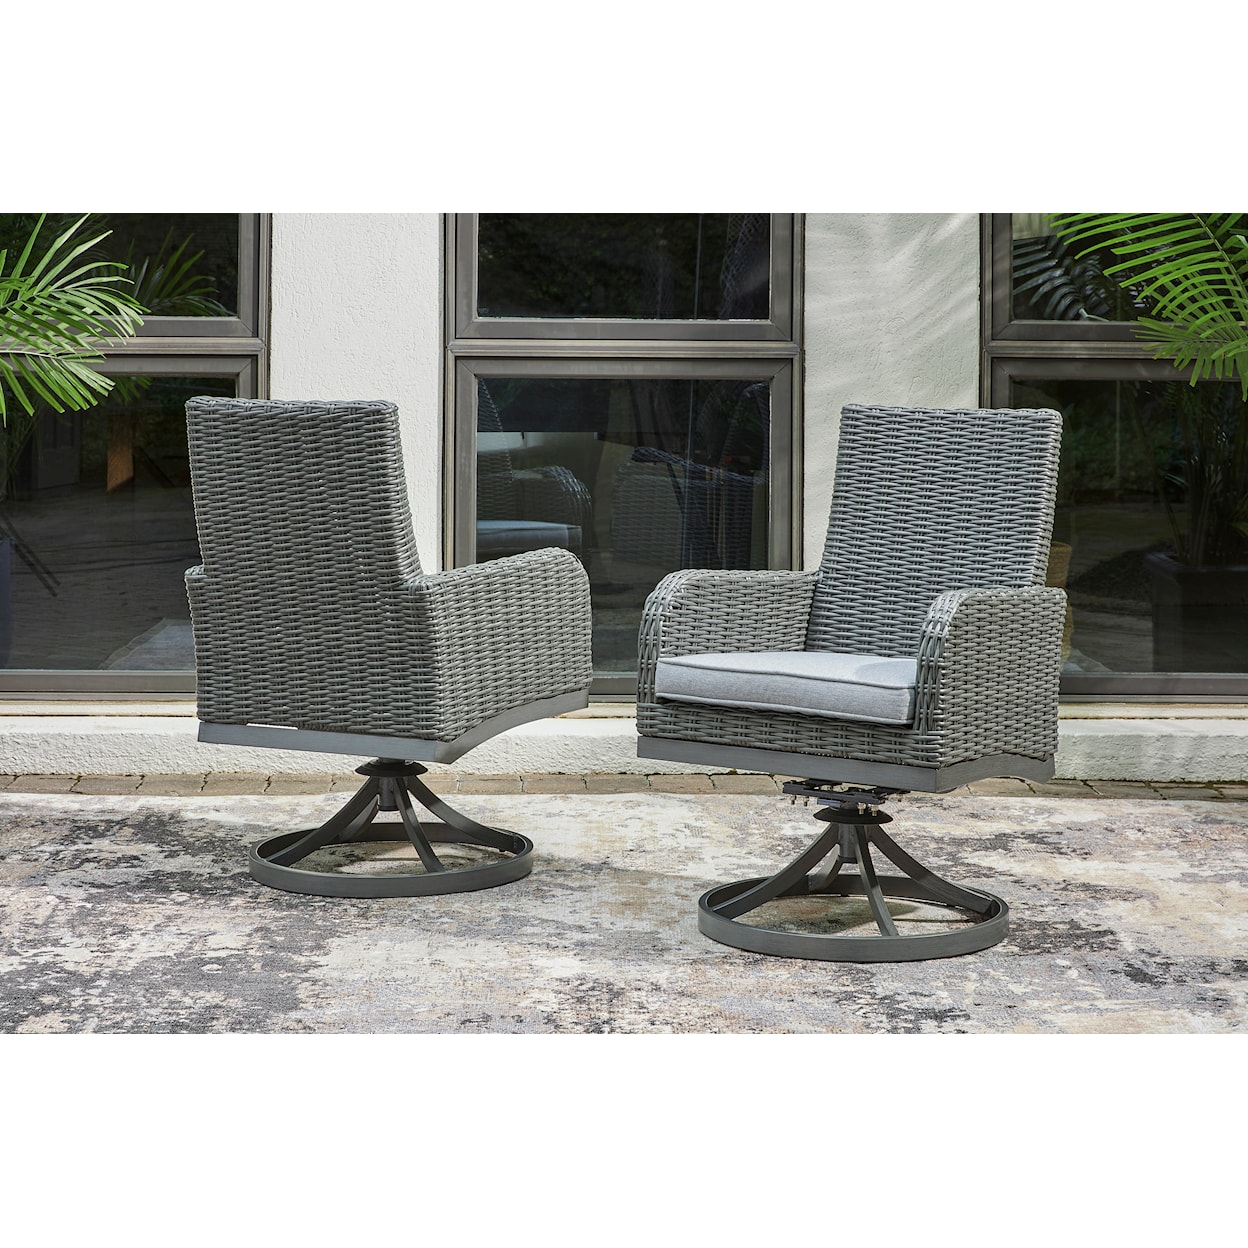 Signature Design by Ashley Elite Park Swivel Chair with Cushion (Set of 2)